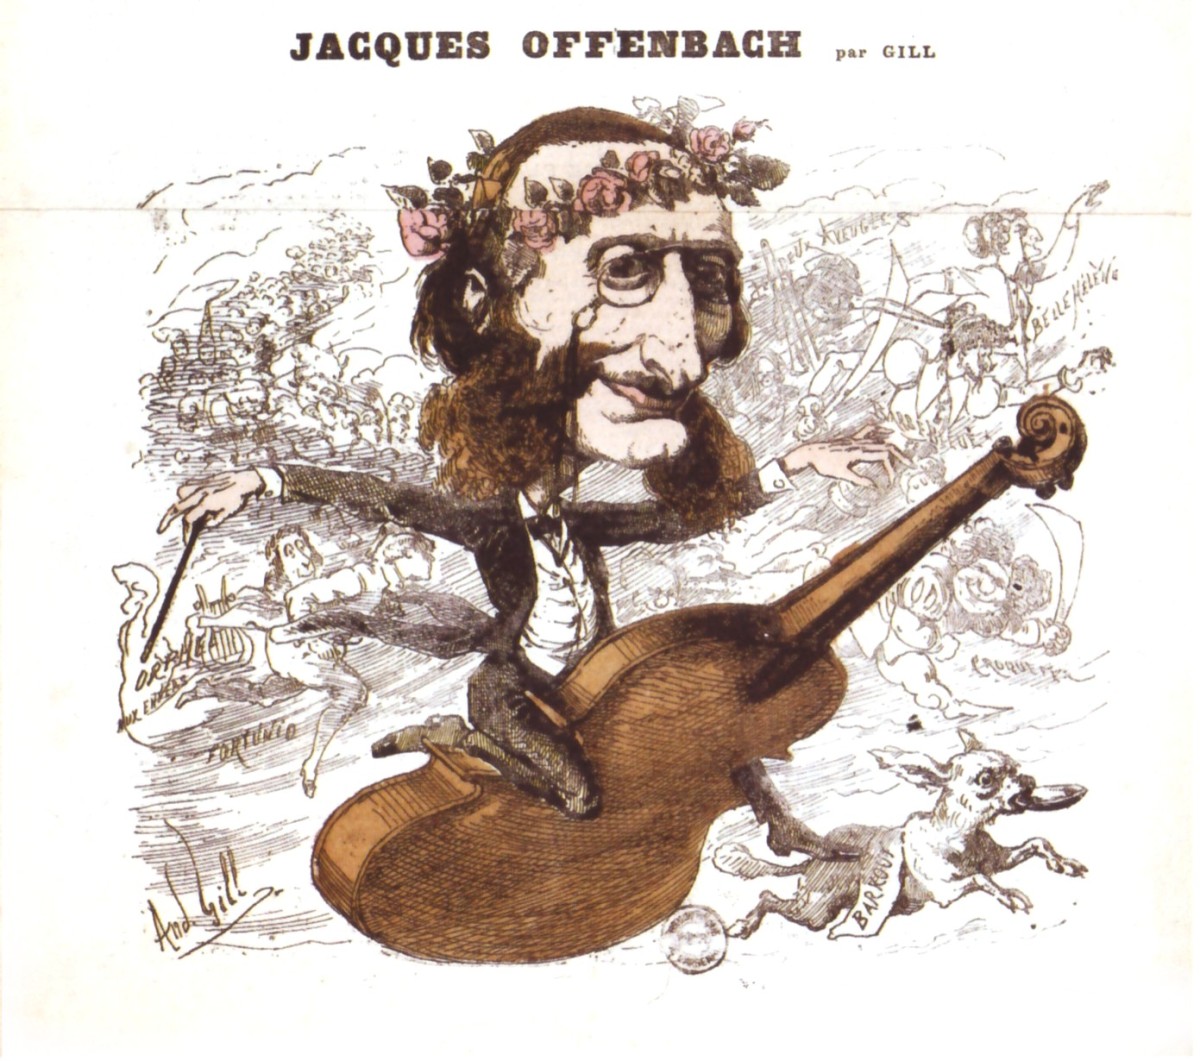 Jacques Offenbach riding his success, a caricature from a Paris newspaper.